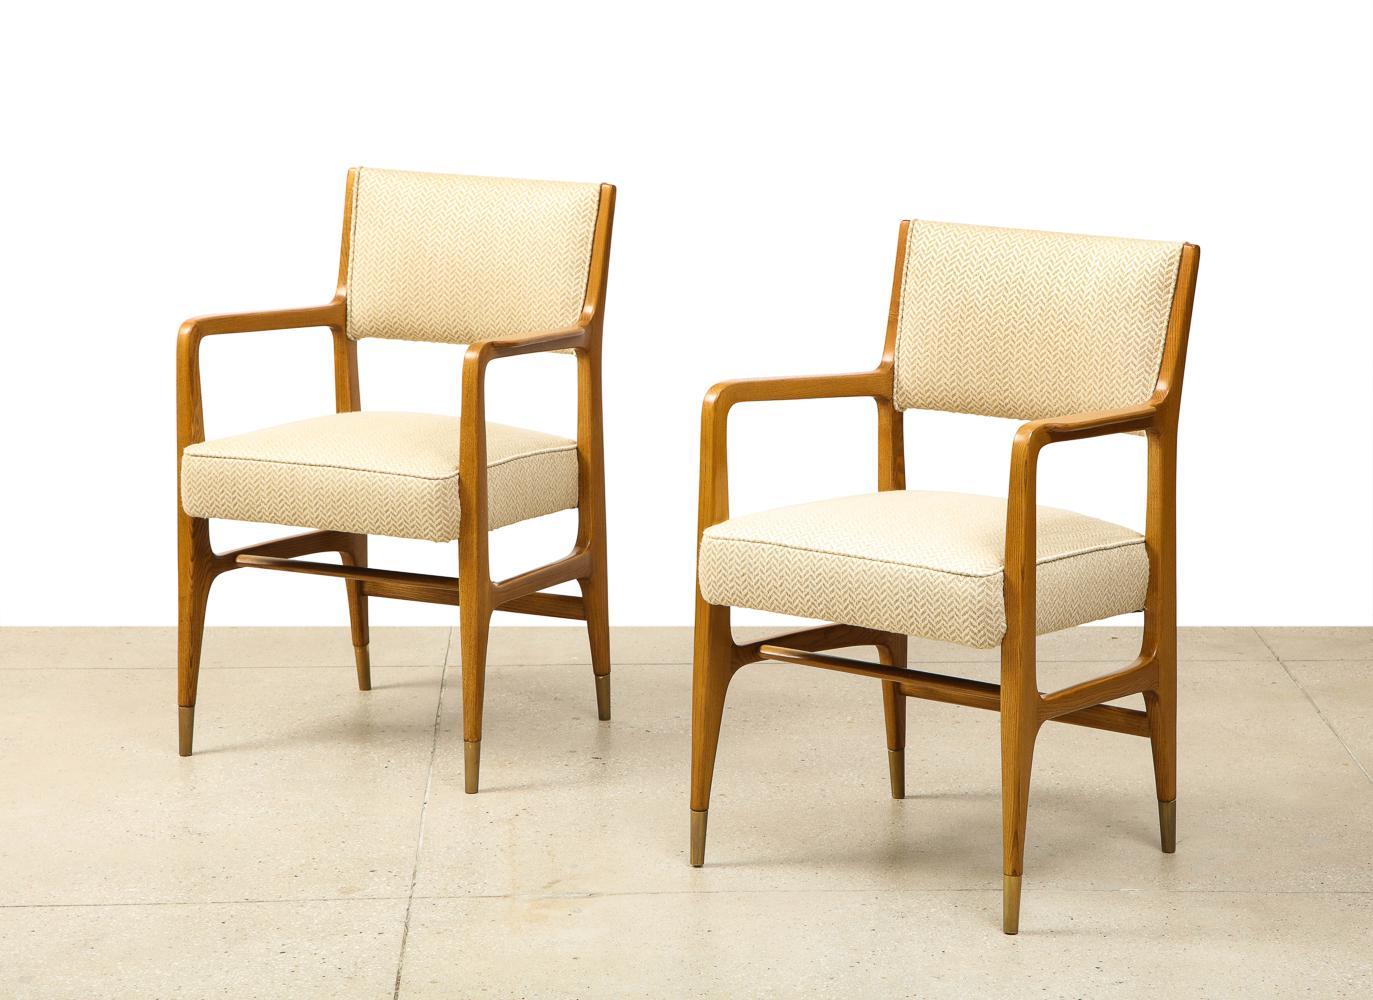 Rare pair of armchairs by Gio Ponti. A rare variation of model #110, produced by Cassina. Open-grain bleached ash frames with upholstered seat and back and brass sabots. Very good condition. Wood has been recently refinished and seats recently